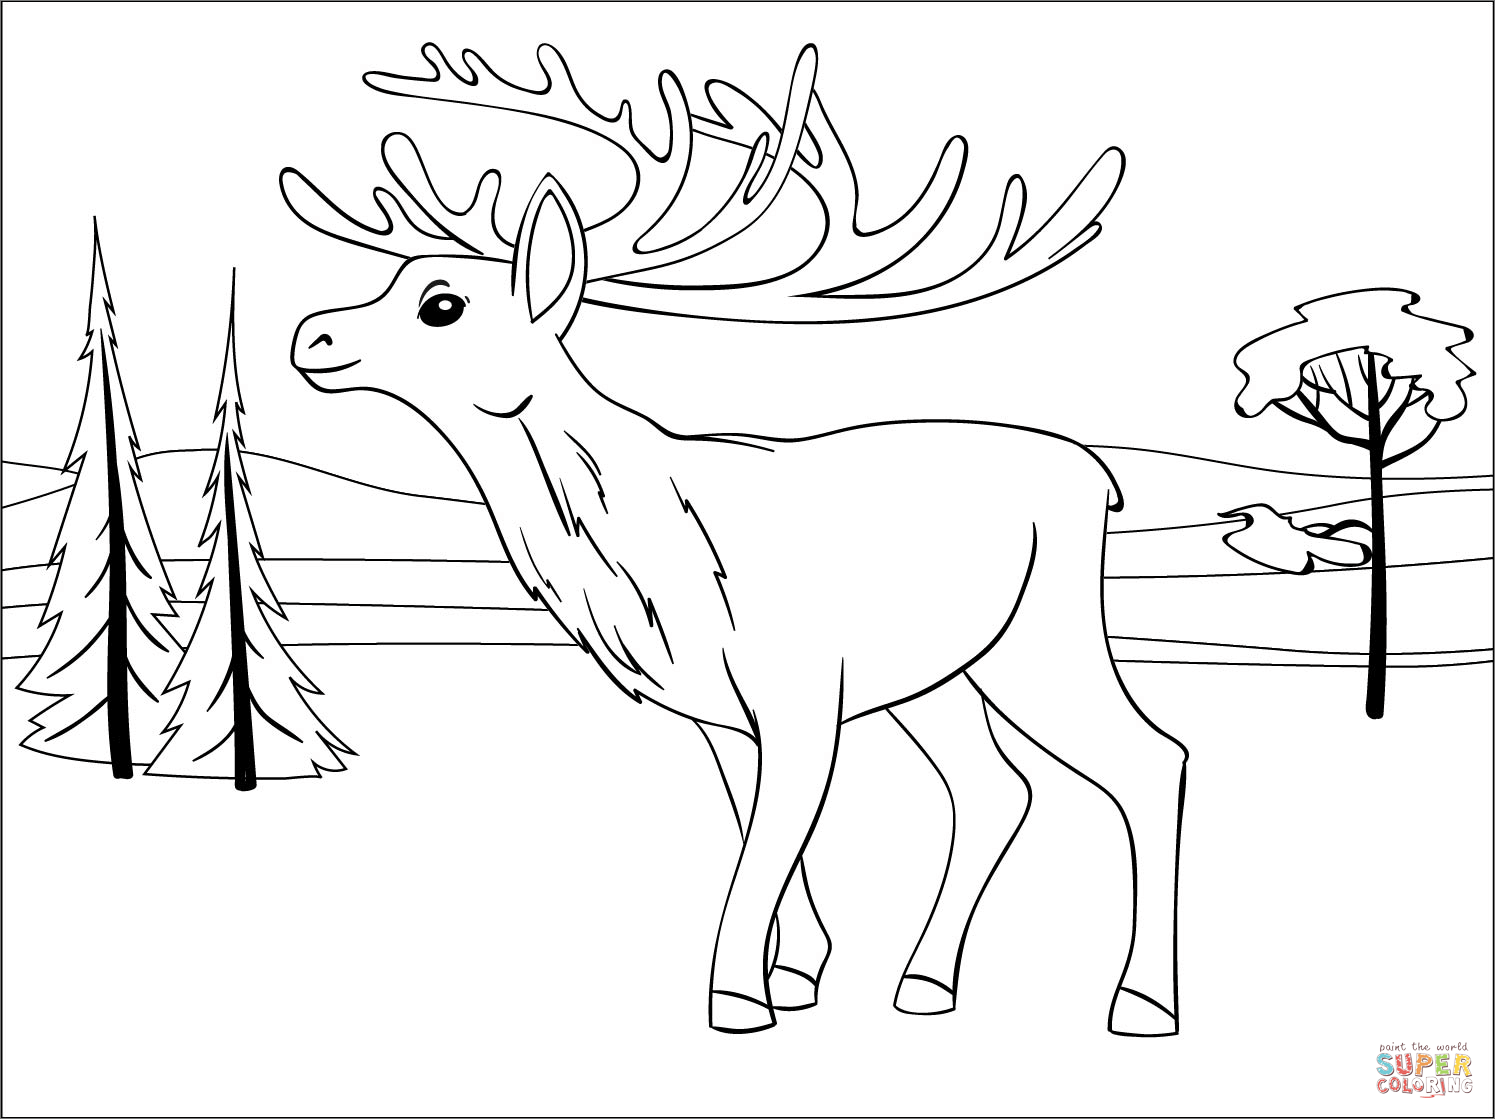 Reindeer coloring page free printable coloring pages